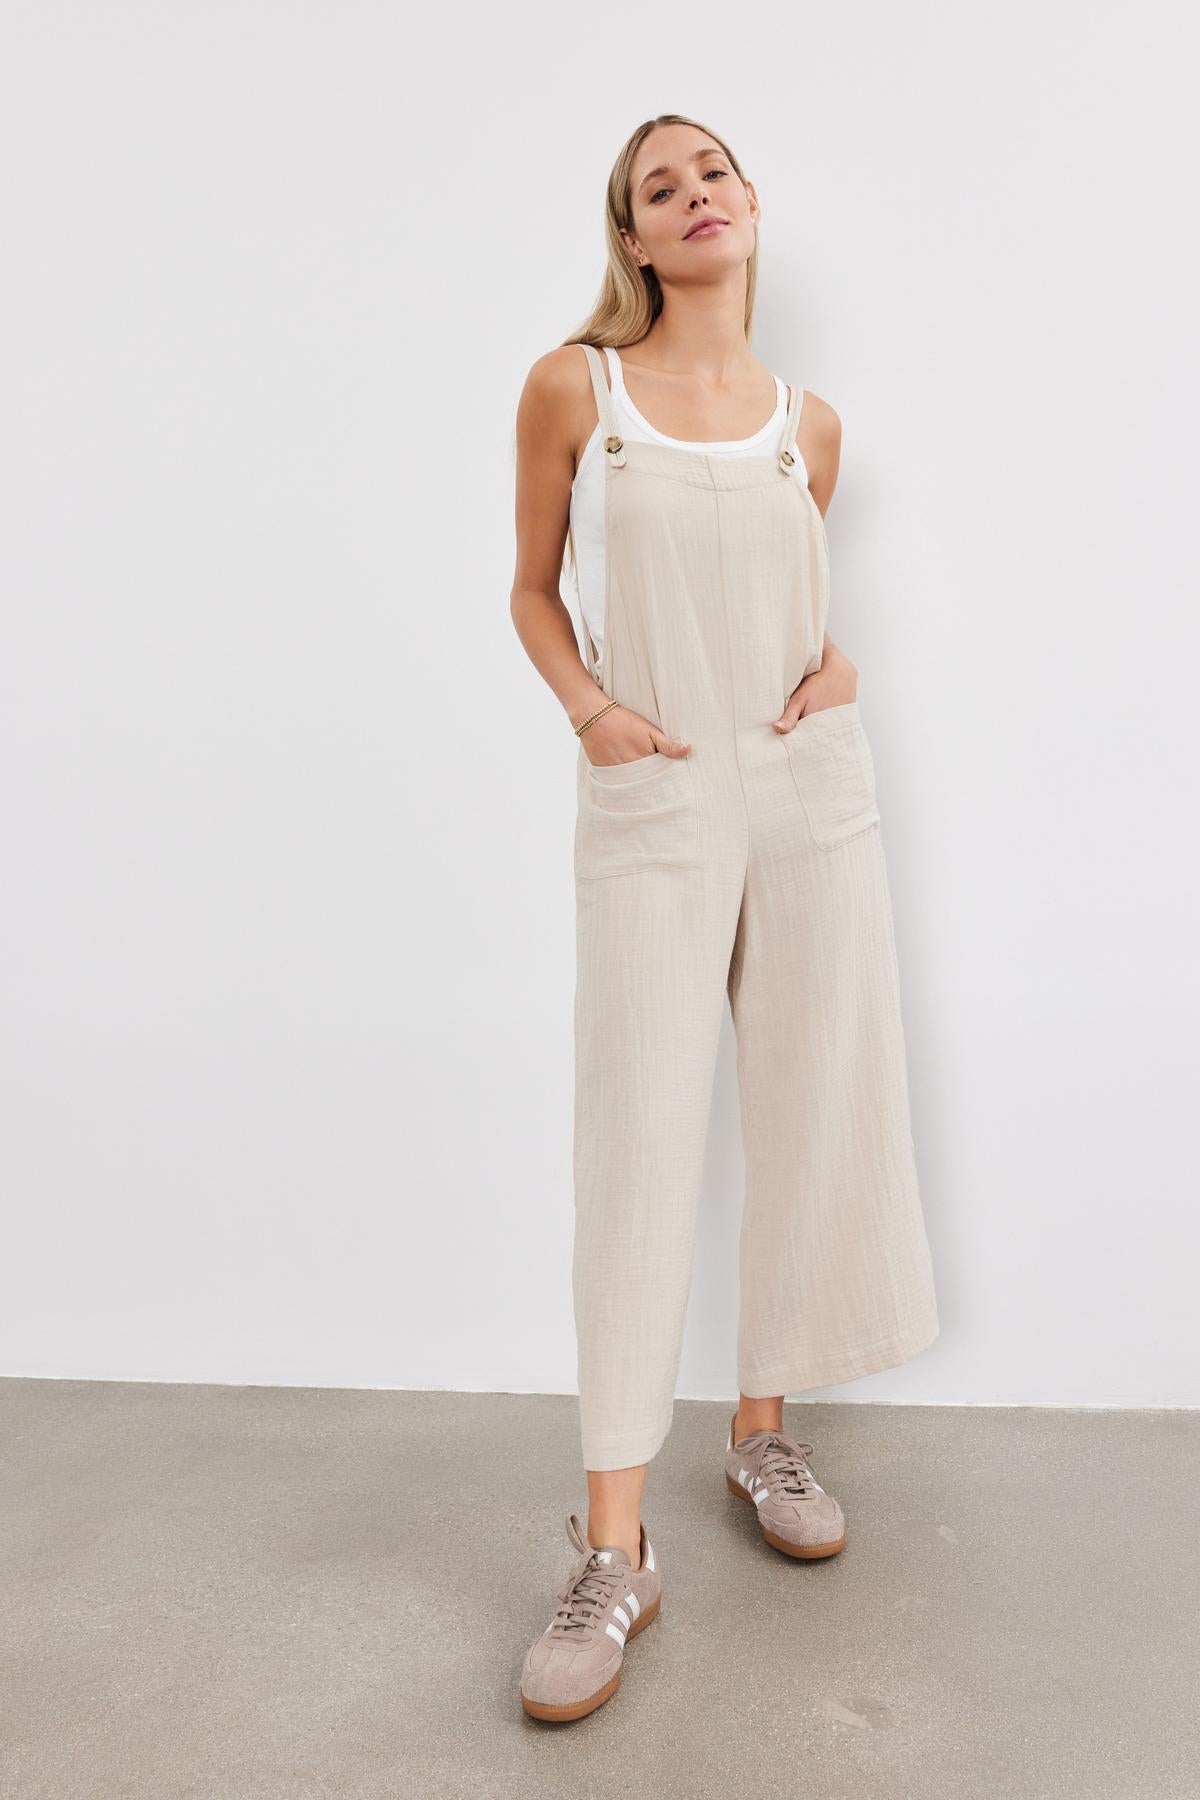 A young woman stands confidently, wearing a Velvet by Graham & Spencer EVERLEE COTTON GAUZE JUMPSUIT with sneakers, against a plain white backdrop.-36910029209793